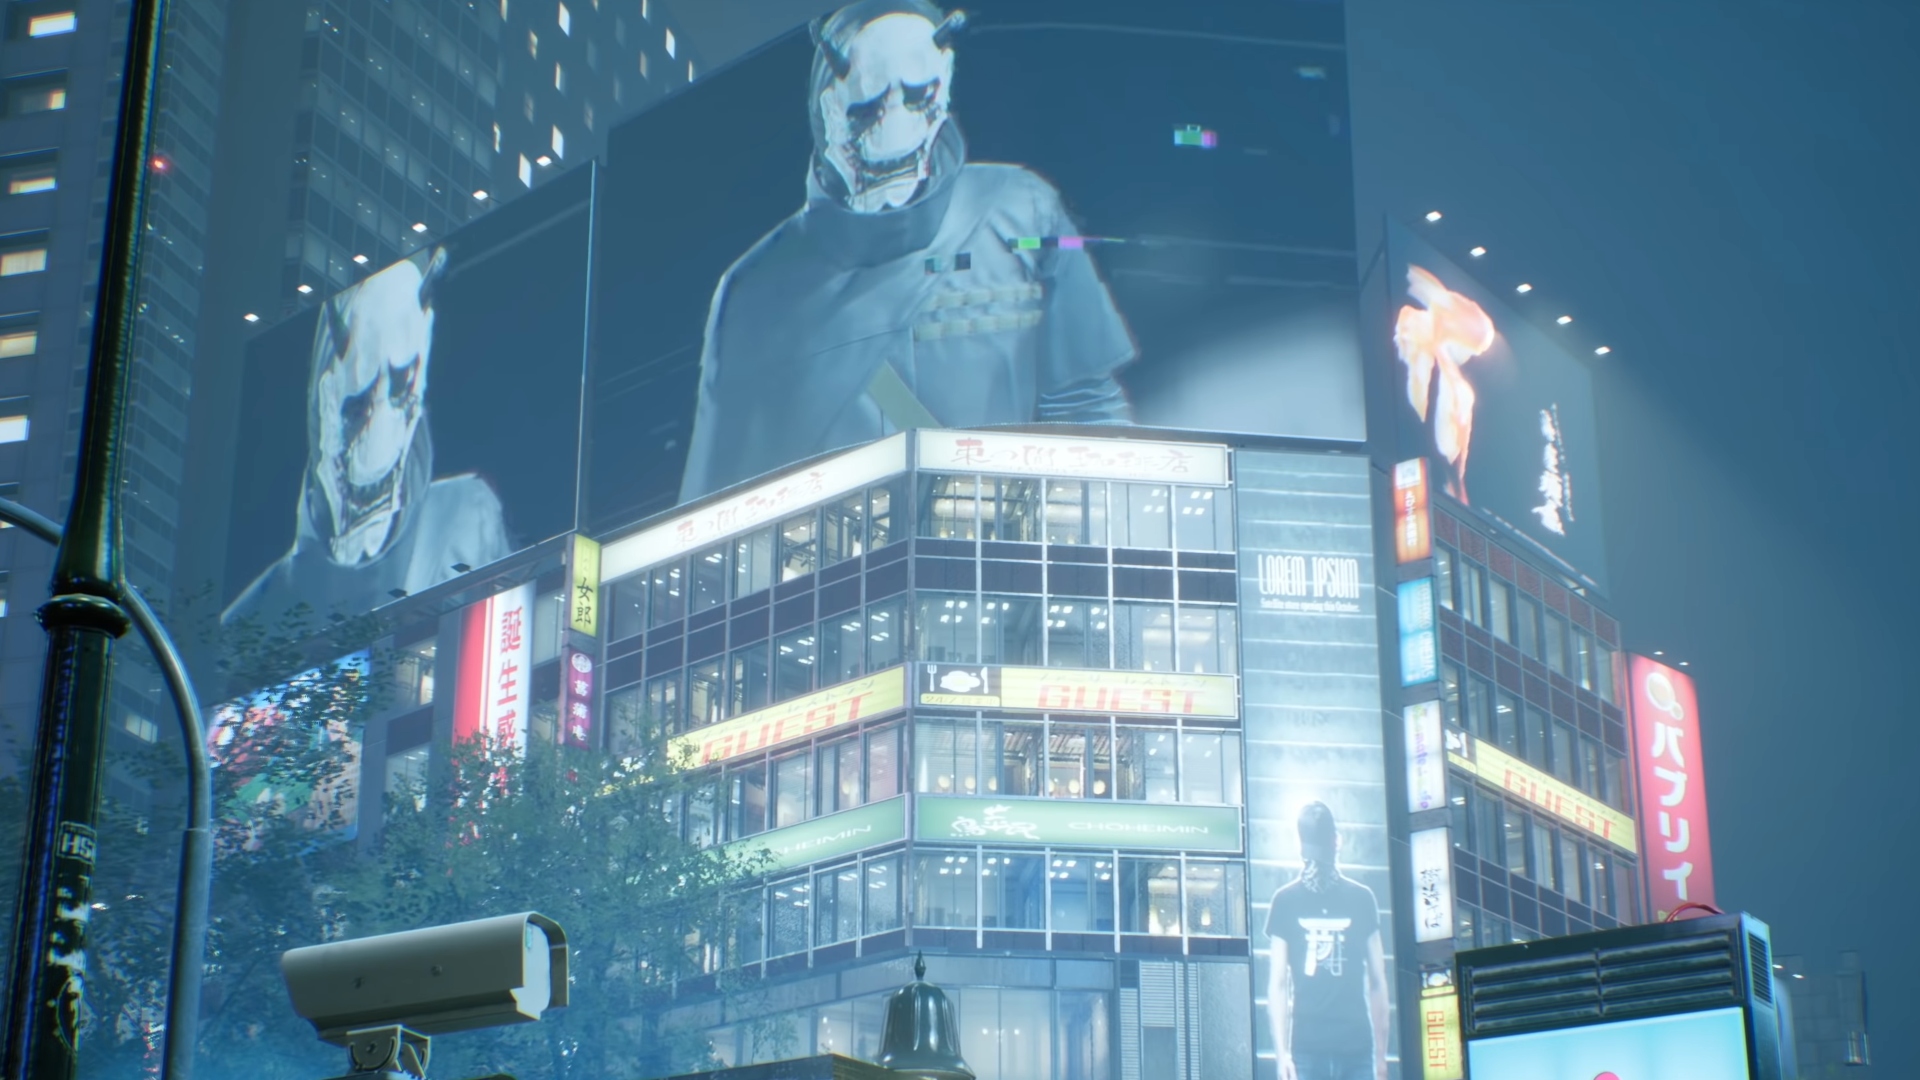 The Hannya figure looms ominously down at the abandoned Tokyo from a screen.